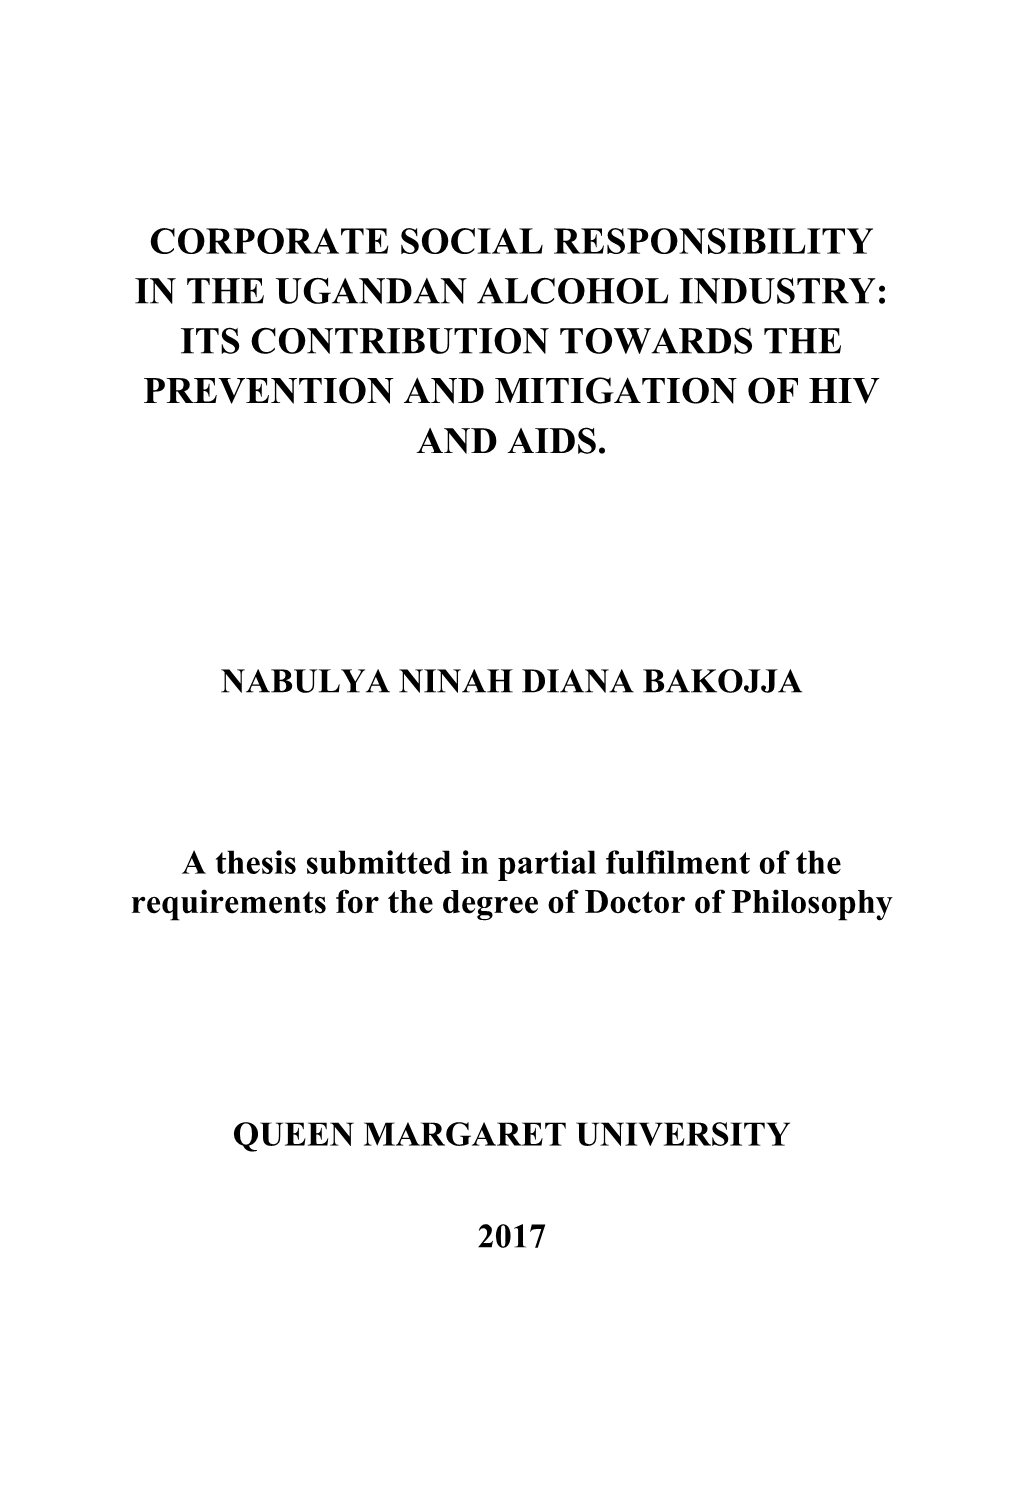 Corporate Social Responsibility in the Ugandan Alcohol Industry: Its Contribution Towards the Prevention and Mitigation of Hiv and Aids